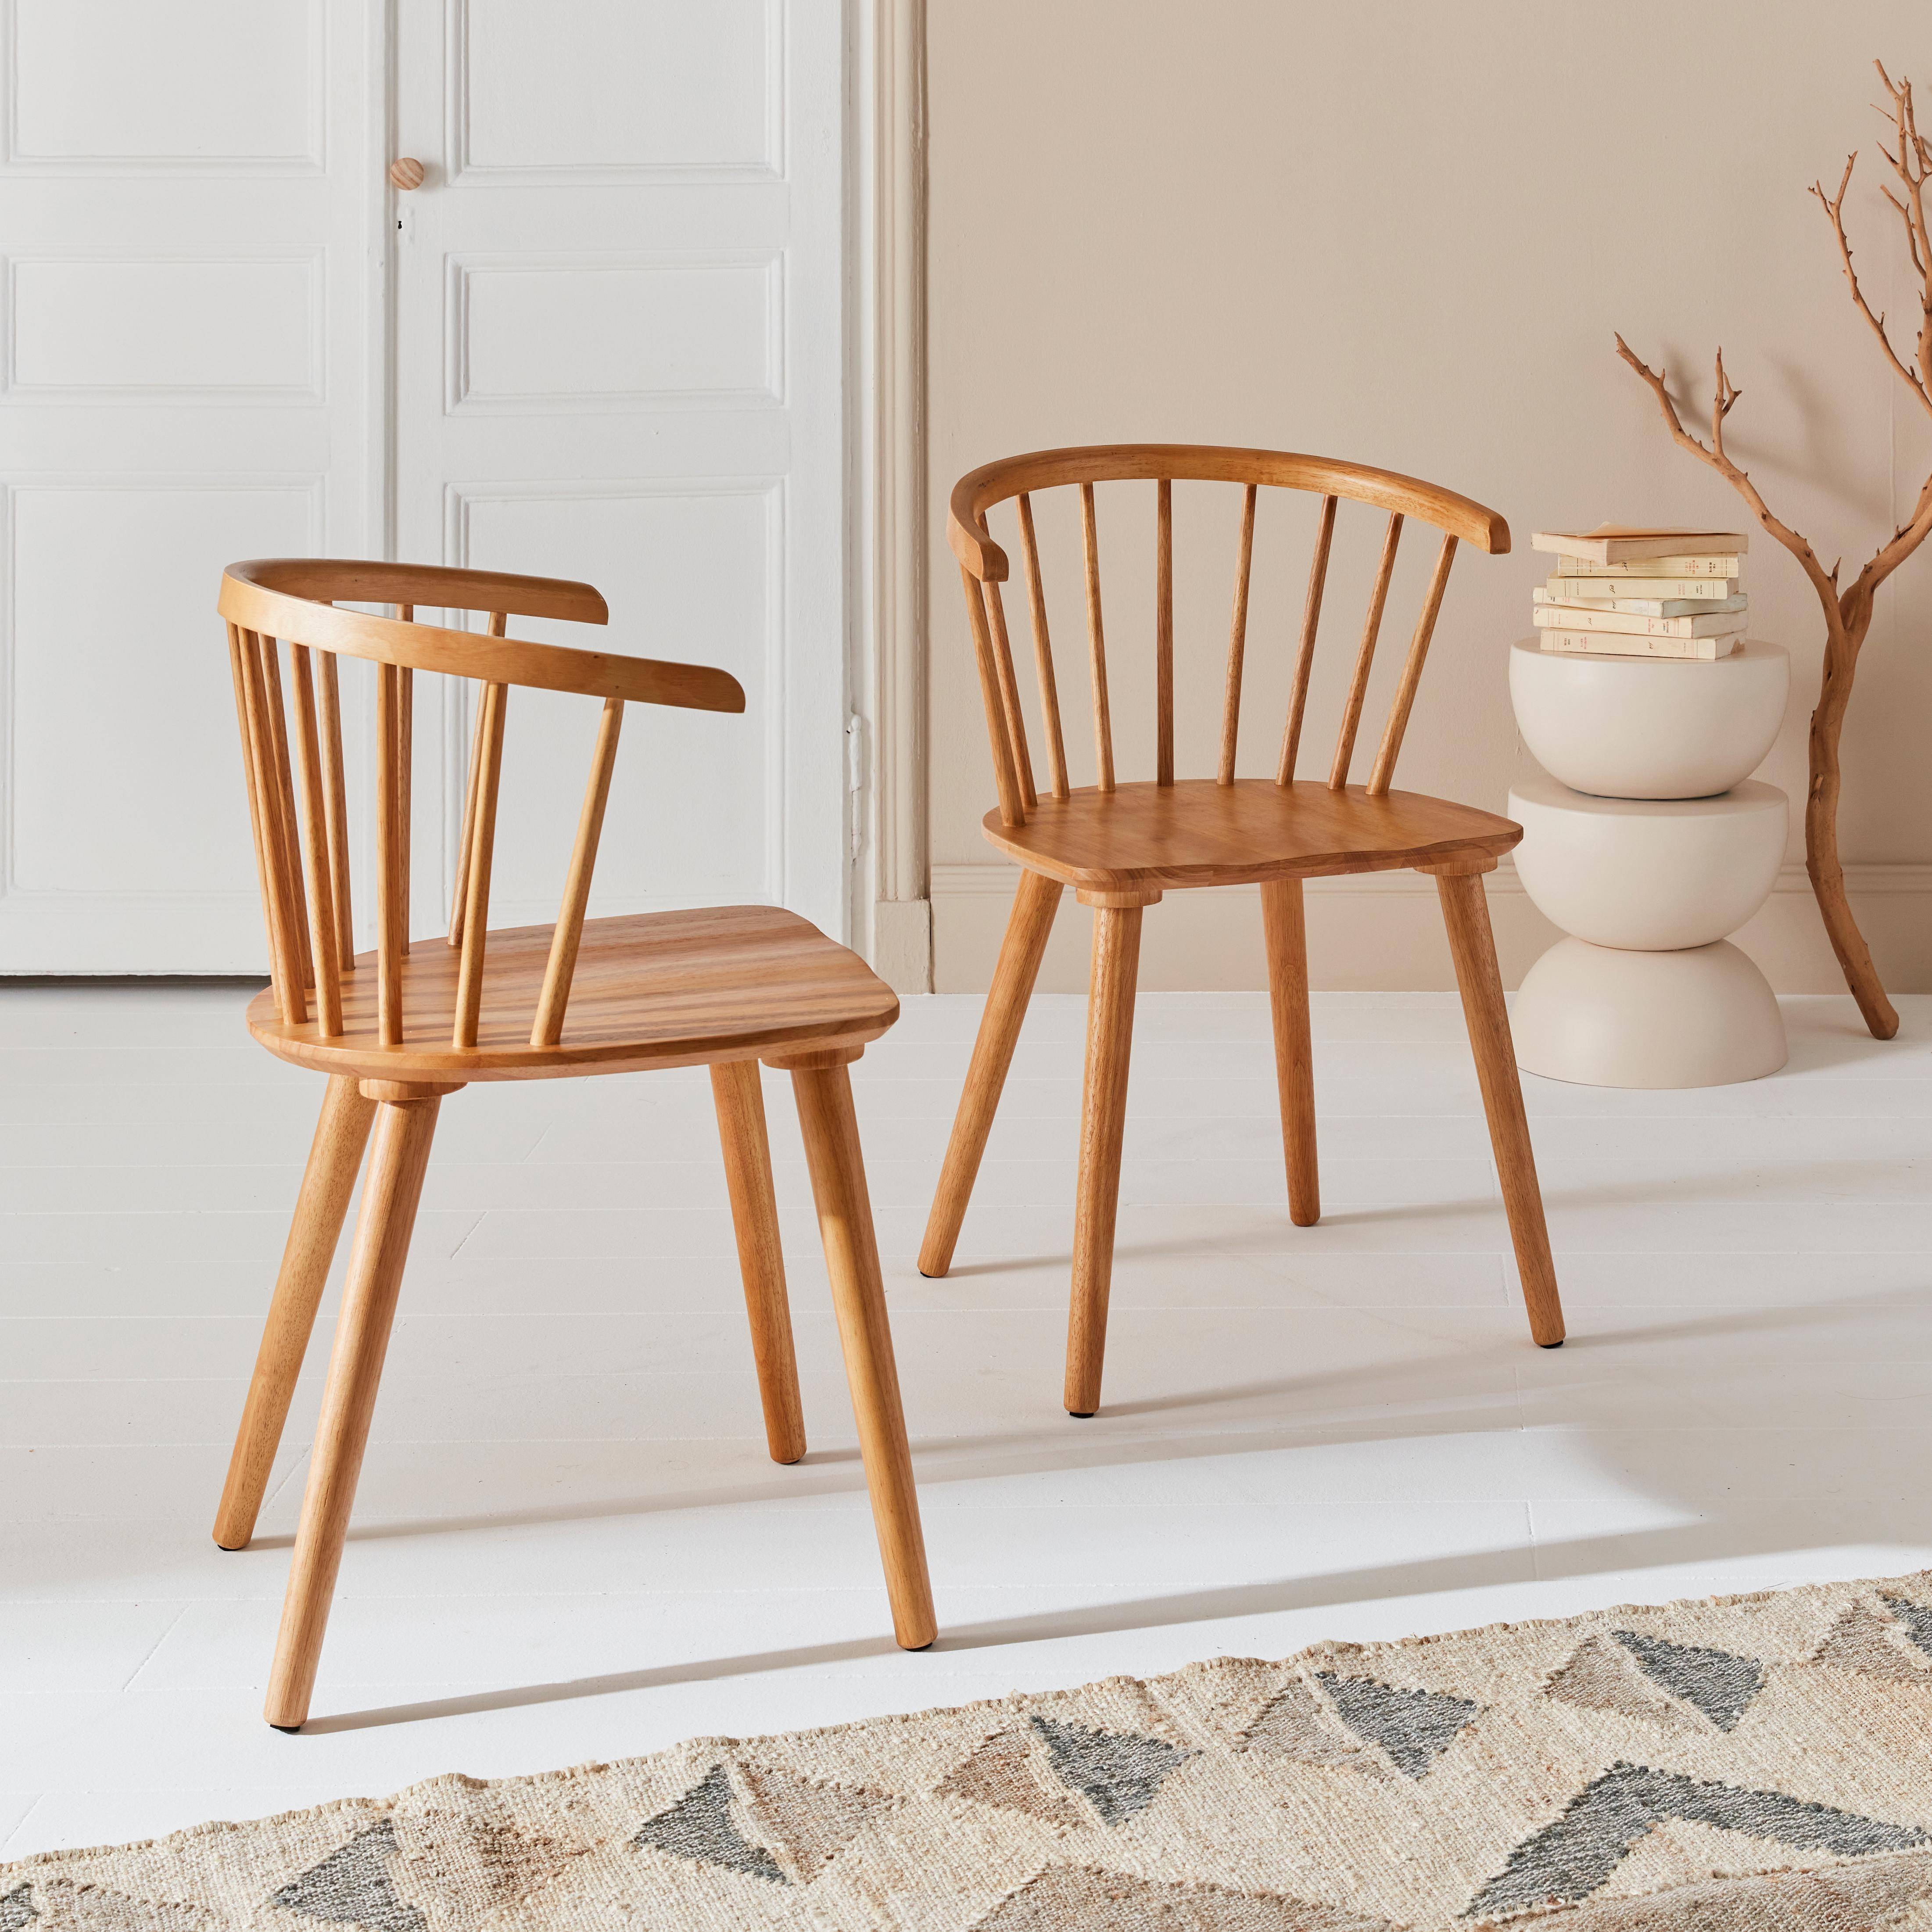 Pair of  Wood and Plywood Spindle Chairs, natural, L53 x W47.5 x H76cm ,sweeek,Photo2